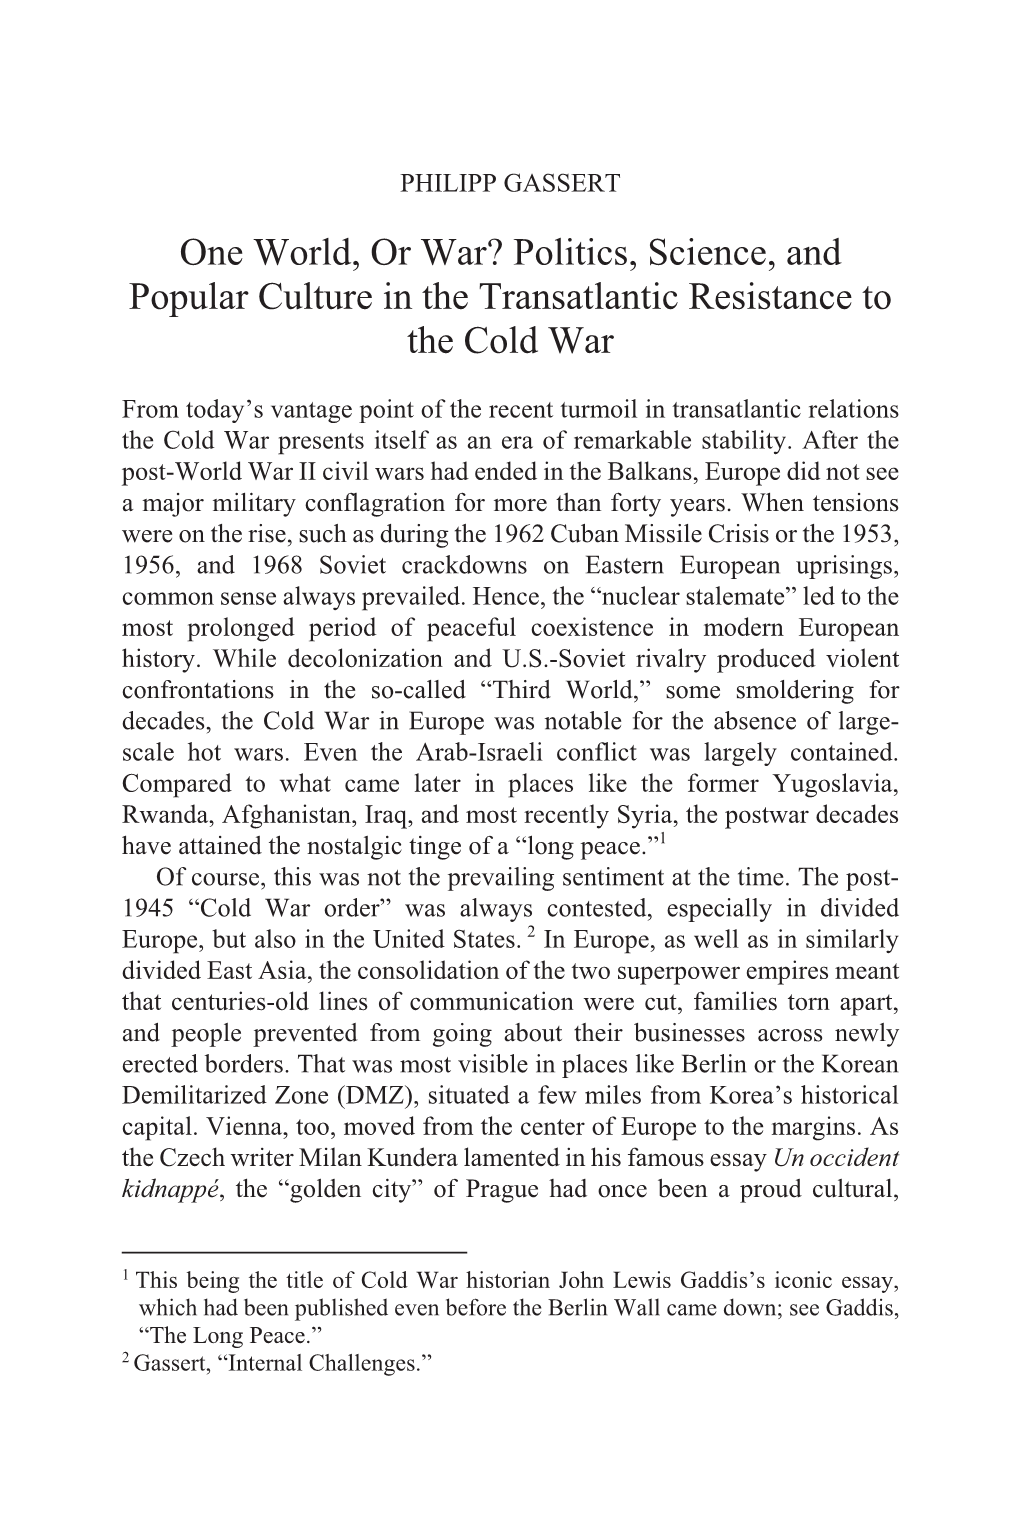 Politics, Science, and Popular Culture in the Transatlantic Resistance to the Cold War